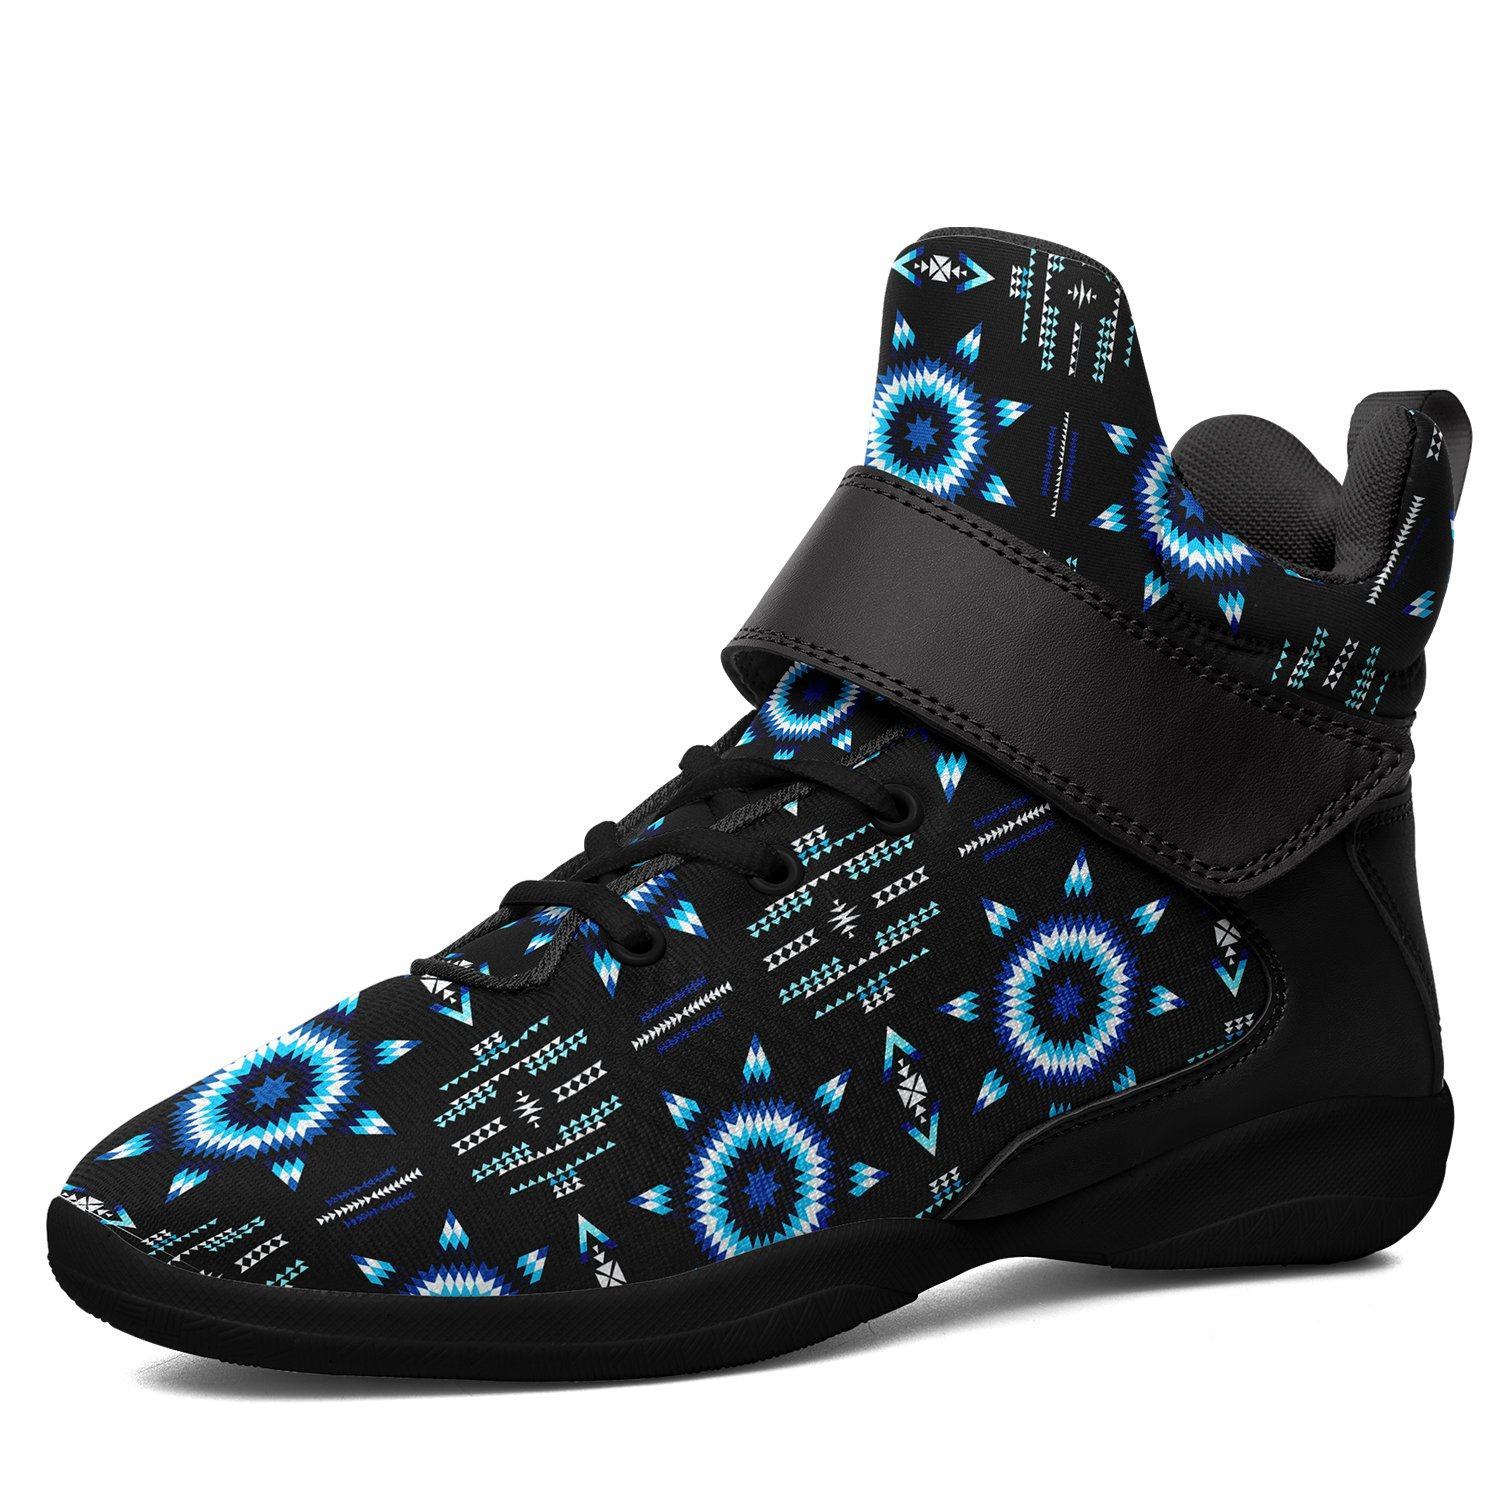 Rising Star Wolf Moon Kid's Ipottaa Basketball / Sport High Top Shoes 49 Dzine US Child 12.5 / EUR 30 Black Sole with Black Strap 